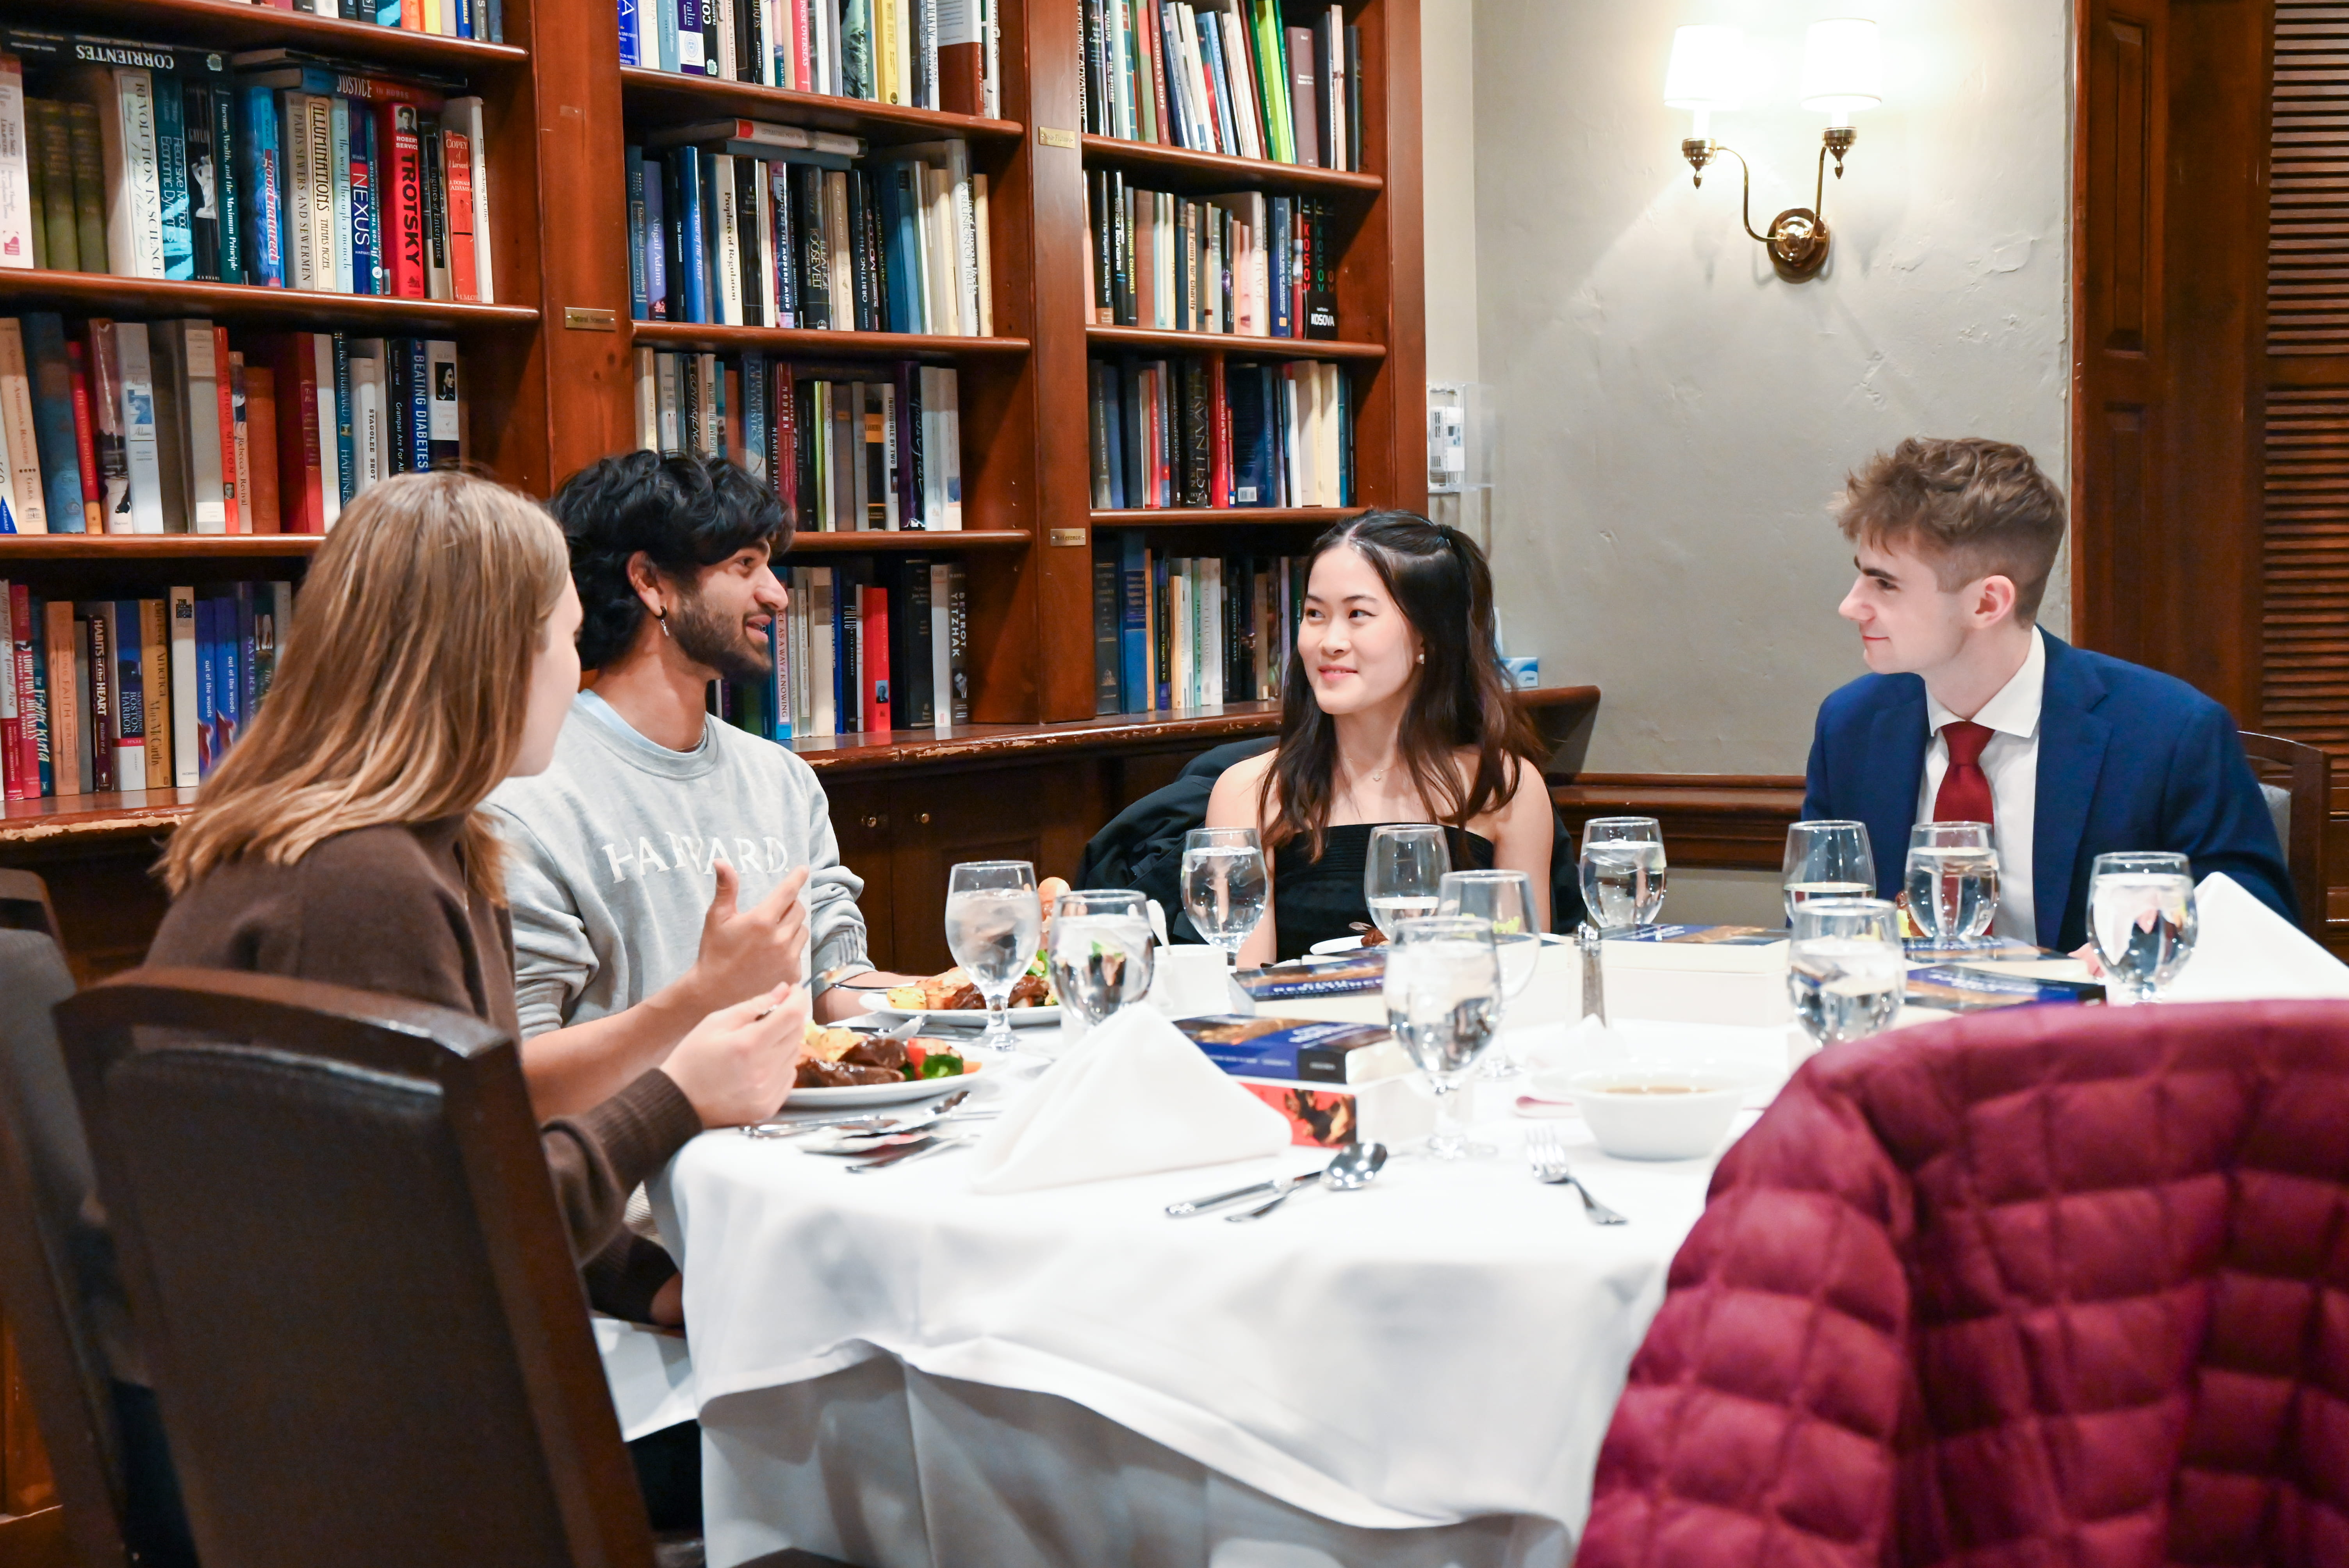 Post-faculty dialogue, students further discuss the topic over a shared meal.